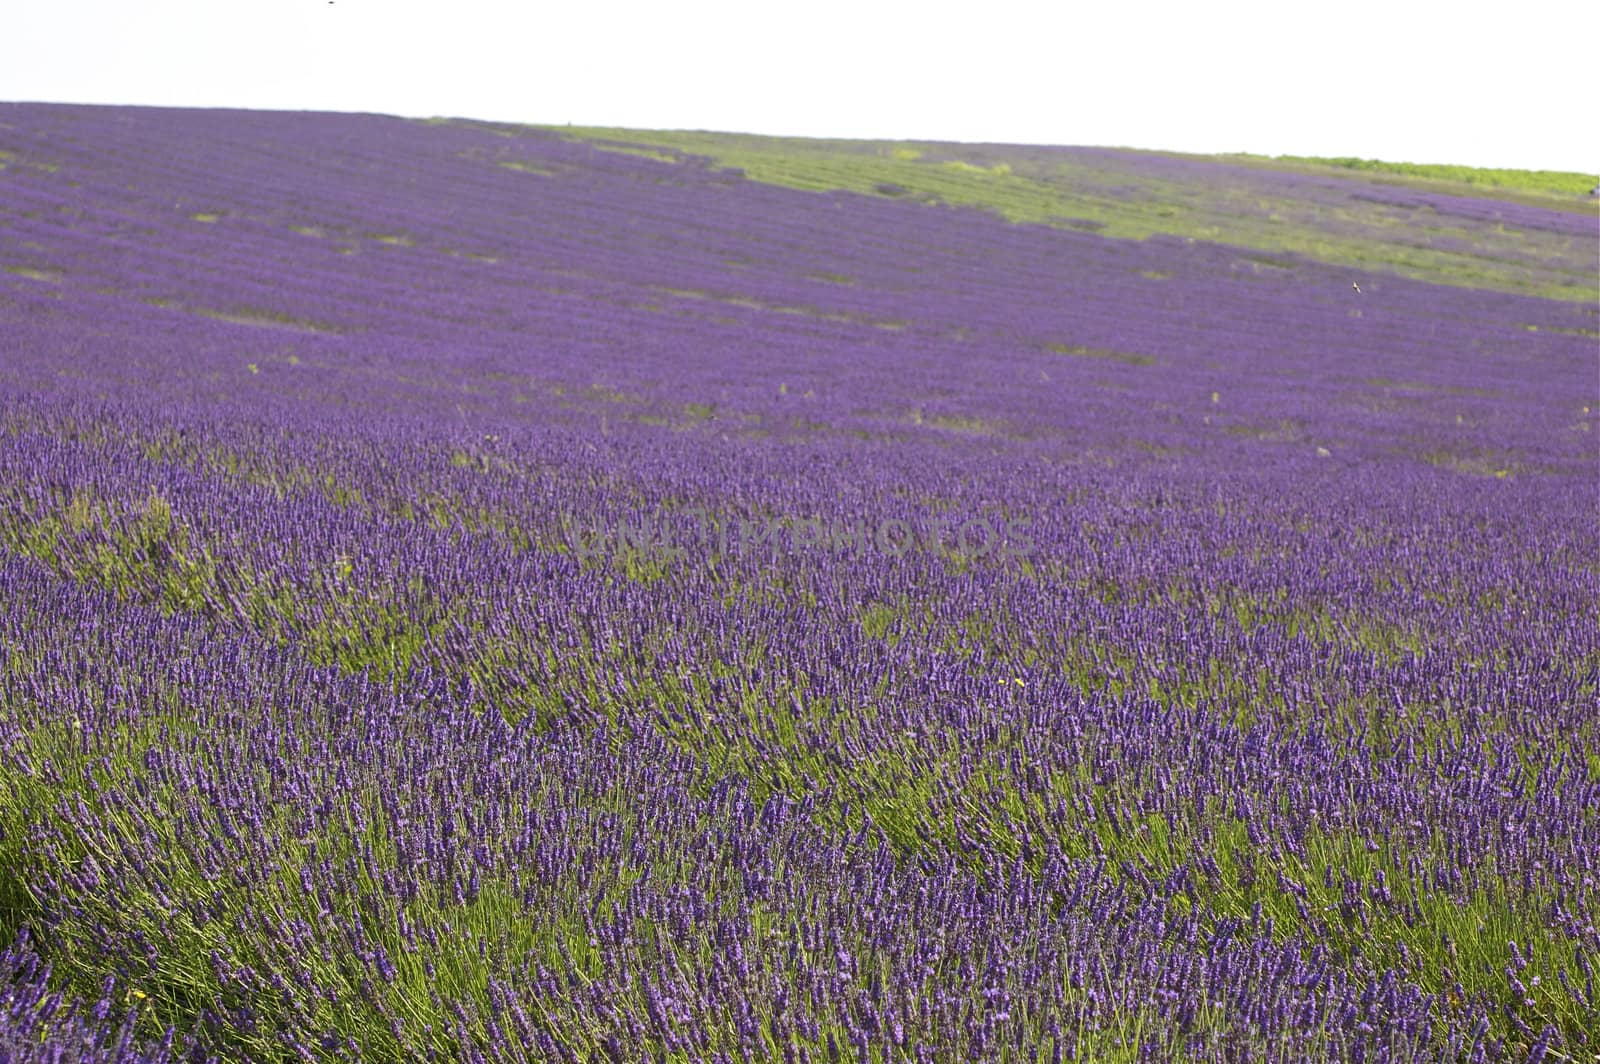 Rows of lavender leading up a hill to the horizon against a pale sky with copy space.